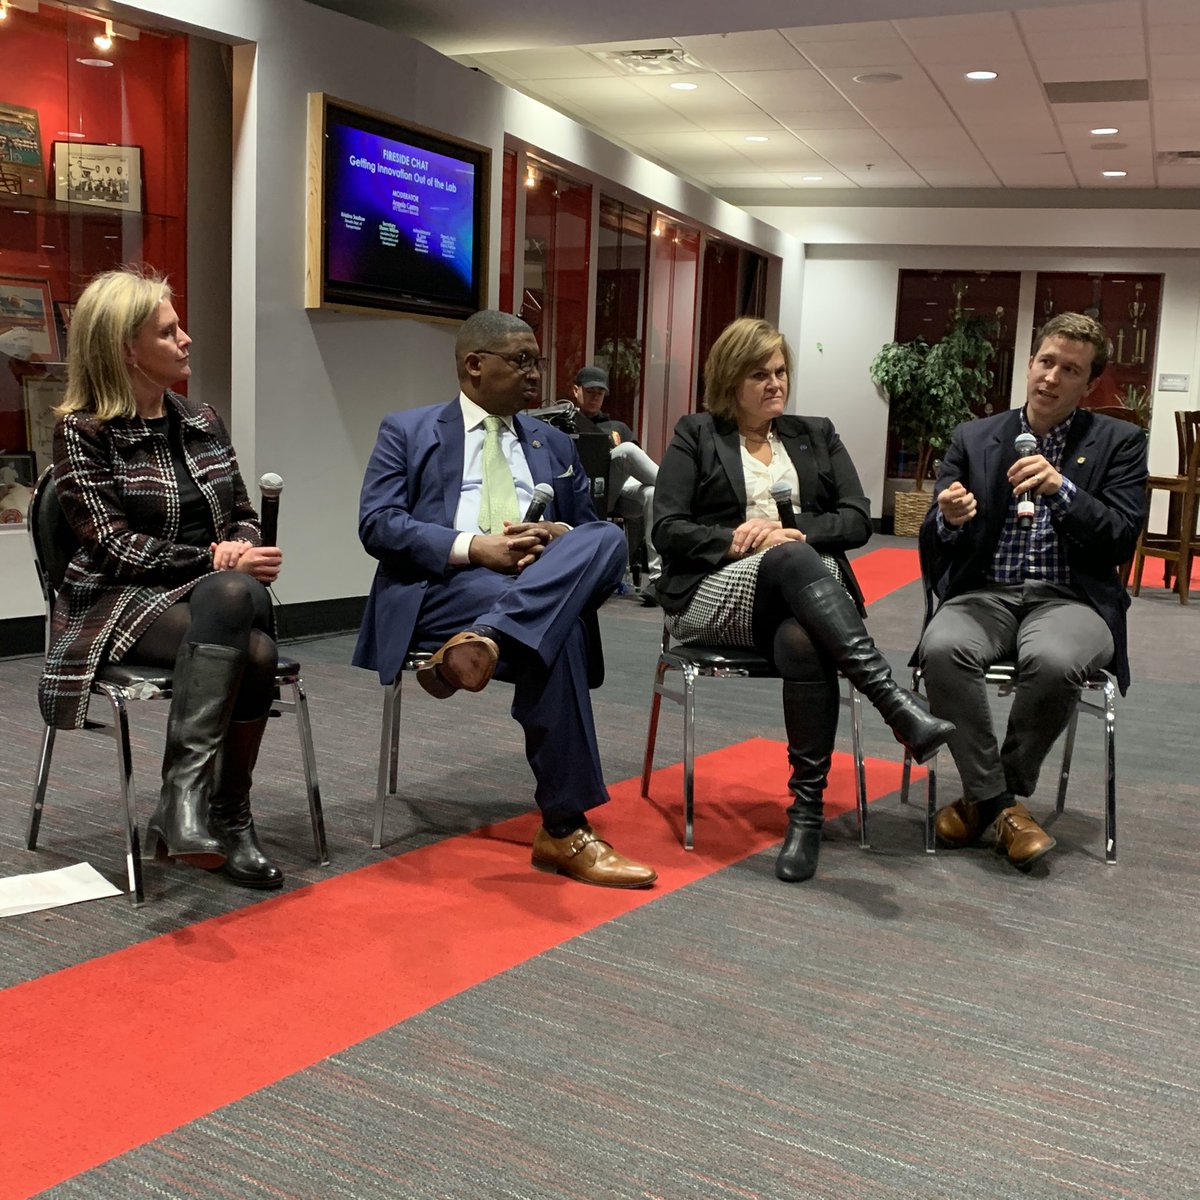 Insightful fireside chat with panel members @KJaneWilliams @aulievegas @DesertSwallow @onevisionary and #DAS Finch Fulton during @RTCSNV #GONV2020 event. Thank you for sharing your thoughts for the future of #Transportation and #technology. #innovatevegas #smartcommunity